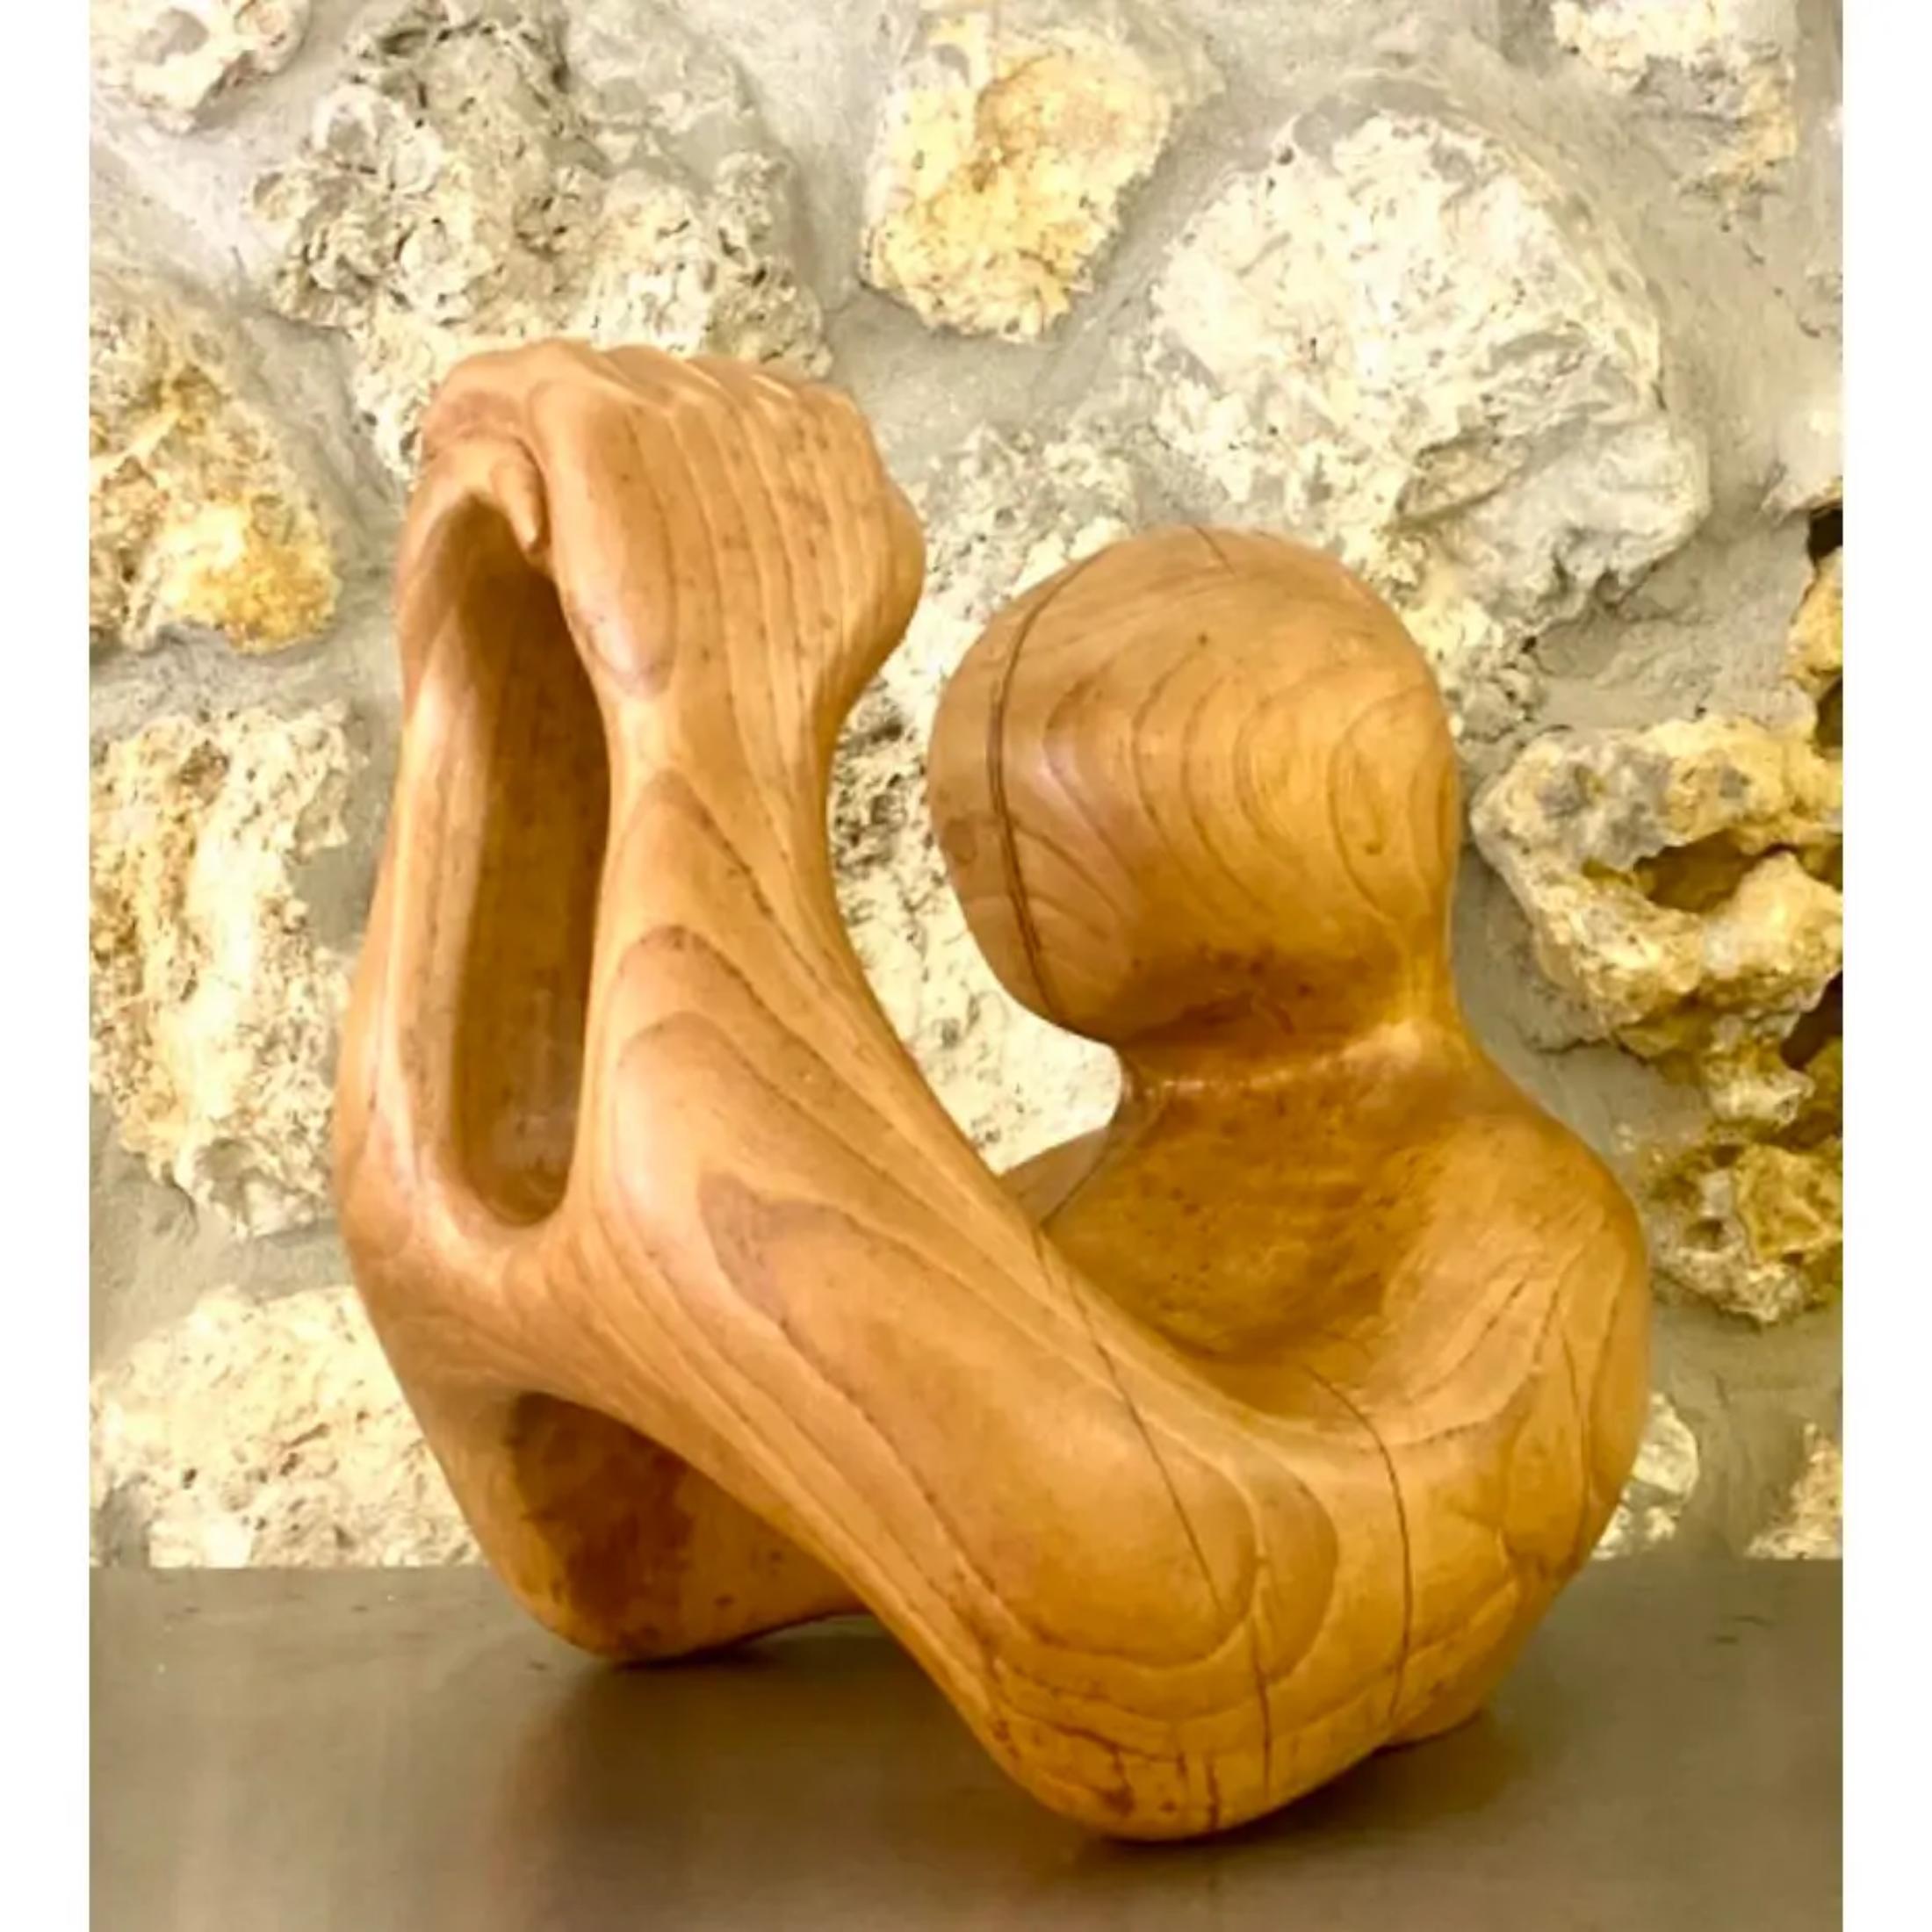 Fantastic vintage hand carved wood sculpture. A beautiful and serene abstract depiction of a figure in prayer. Gorgeous wood grain detail in a polished matte finish. Acquired from a Palm Beach estate